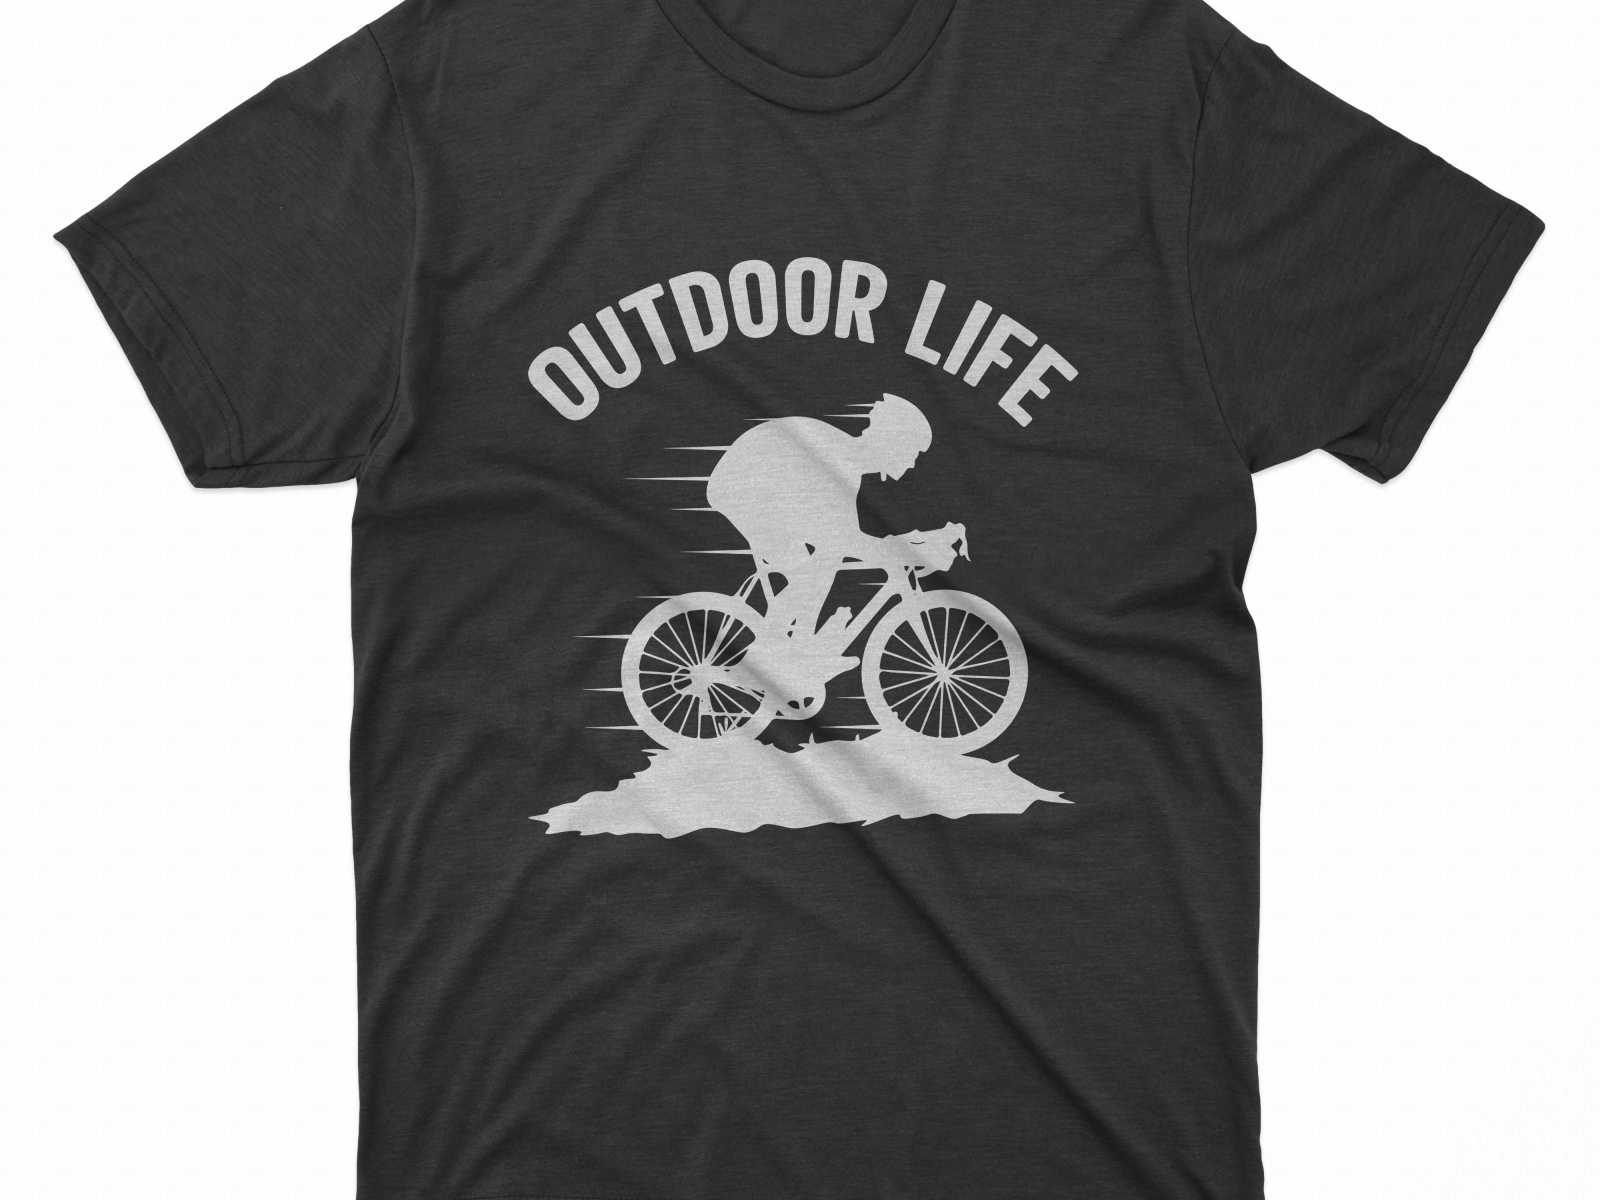 outdoor t-shirts design by md alamin islam on Dribbble